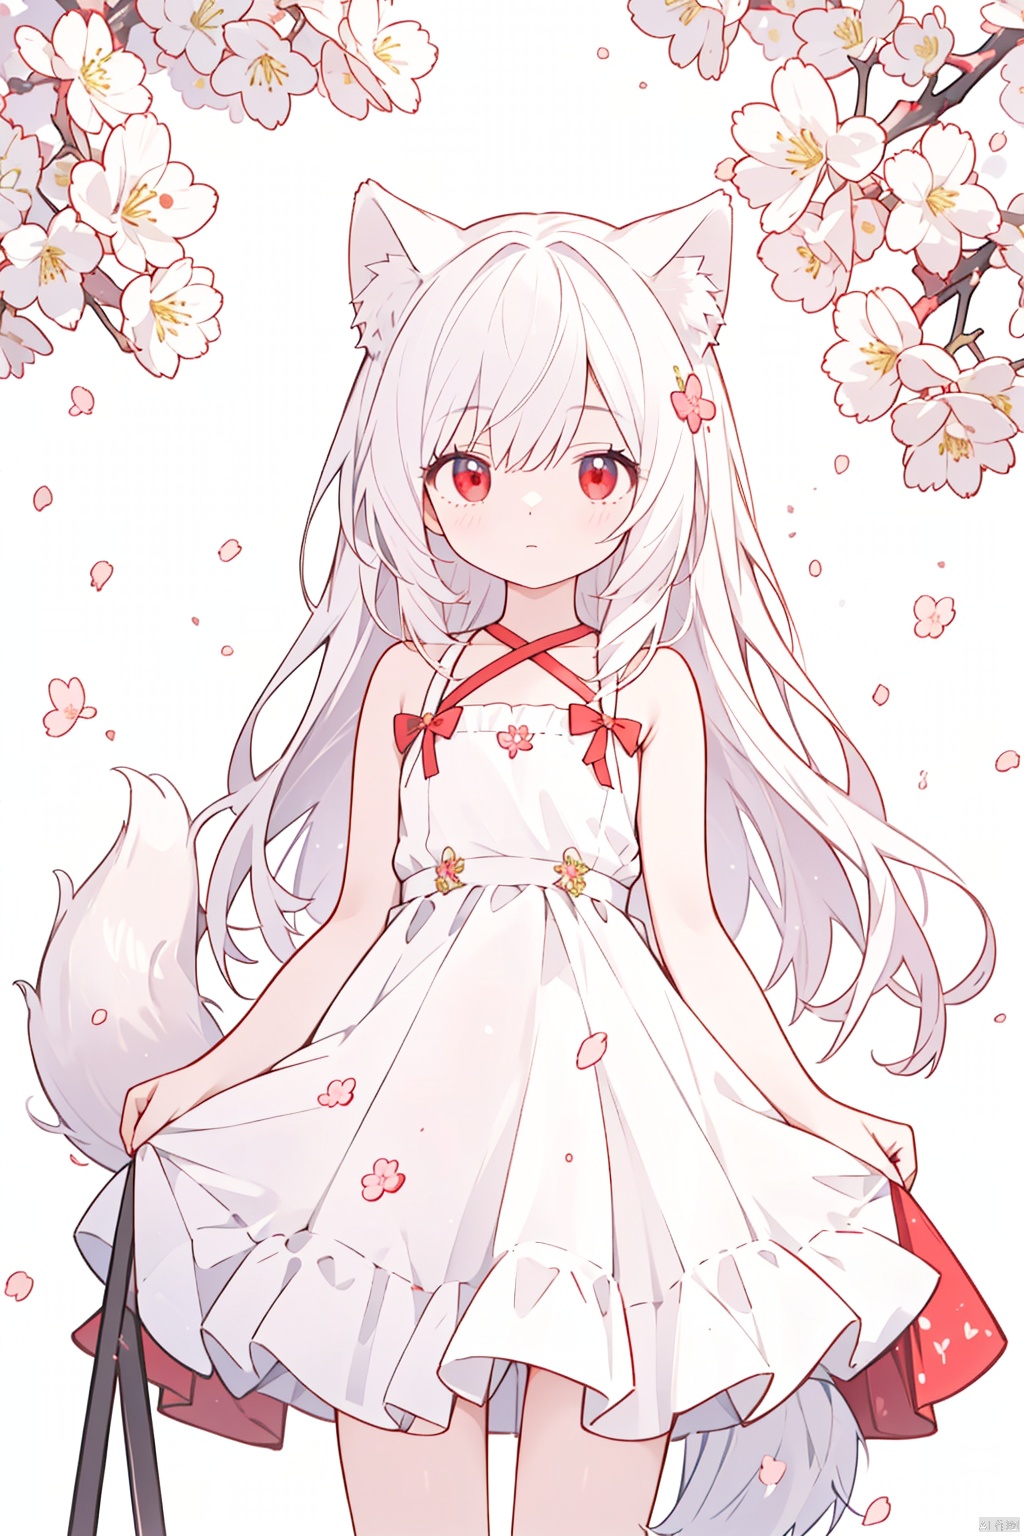  The image features a beautiful anime girl dressed in a flowing white and red dress, standing amidst a flurry of red cherry blossoms. The contrast between her white dress and the red flowers creates a striking visual effect. The lighting in the image is well-balanced, casting a warm glow on the girl and the surrounding flowers. The colors are vibrant and vivid, with the red cherry blossoms standing out against the white sky. The overall style of the image is dreamy and romantic, perfect for a piece of anime artwork. The quality of the image is excellent, with clear details and sharp focus. The girl's dress and the flowers are well-defined, and the background is evenly lit, without any harsh shadows or glare. From a technical standpoint, the image is well-composed, with the girl standing in the center of the frame, surrounded by the blossoms. The use of negative space in the background helps to draw the viewer's attention to the girl and the flowers. The cherry blossoms, often associated with transience and beauty, further reinforce this theme. The girl, lost in her thoughts, seems to be contemplating the fleeting nature of beauty and the passage of time. Overall, this is an impressive image that showcases the photographer's skill in capturing the essence of a scene, as well as their ability to create a compelling narrative through their art. wolf girl,loli,wolf girl,white long hair,red eyes,,white dress,bare shoulders,( large tail), flat chest, colors